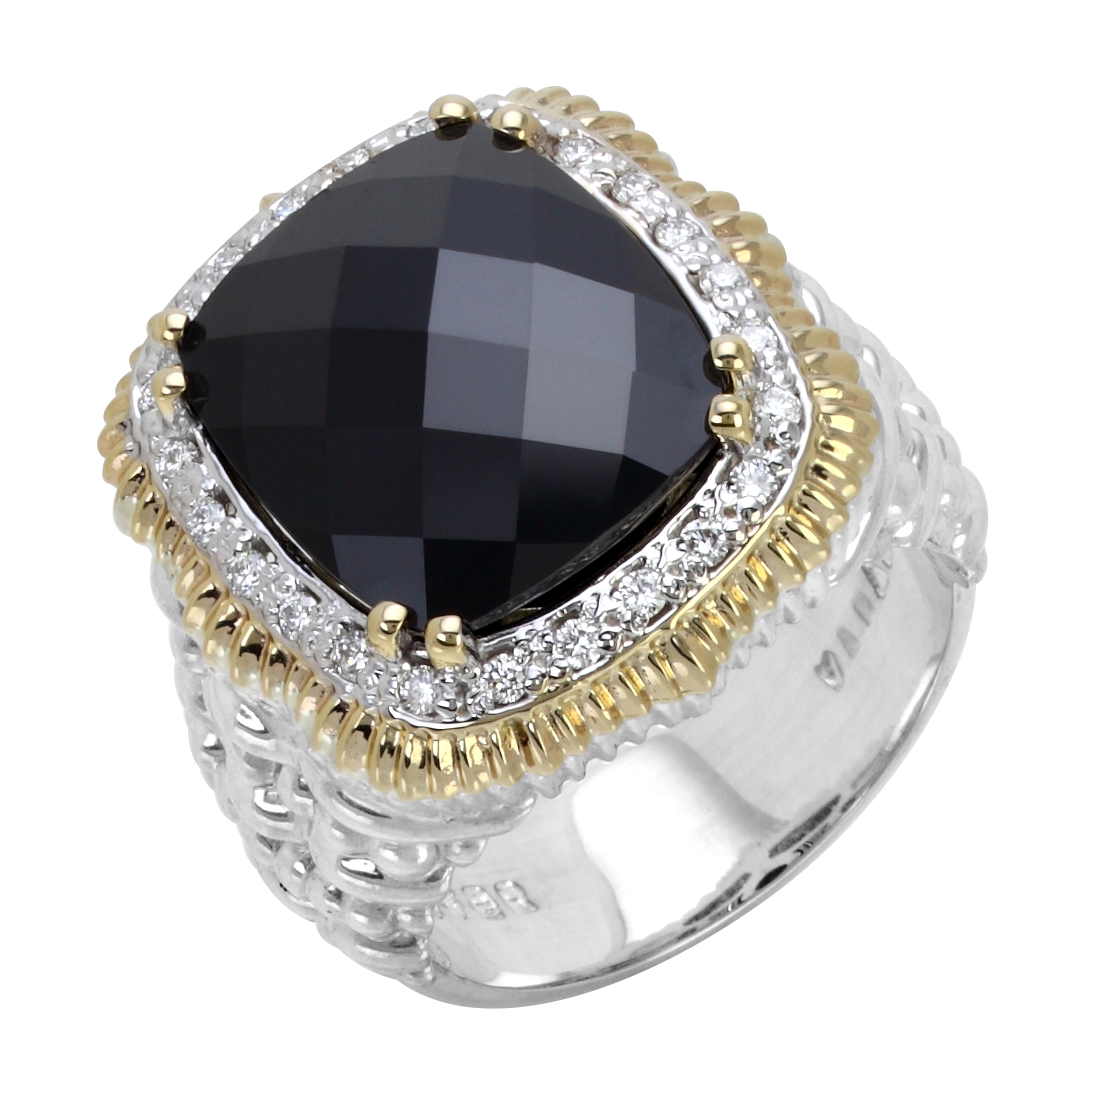 Vahan Sterling Silver & Yellow Gold Gemstone Fashion Ring Galloway and Moseley, Inc. Sumter, SC